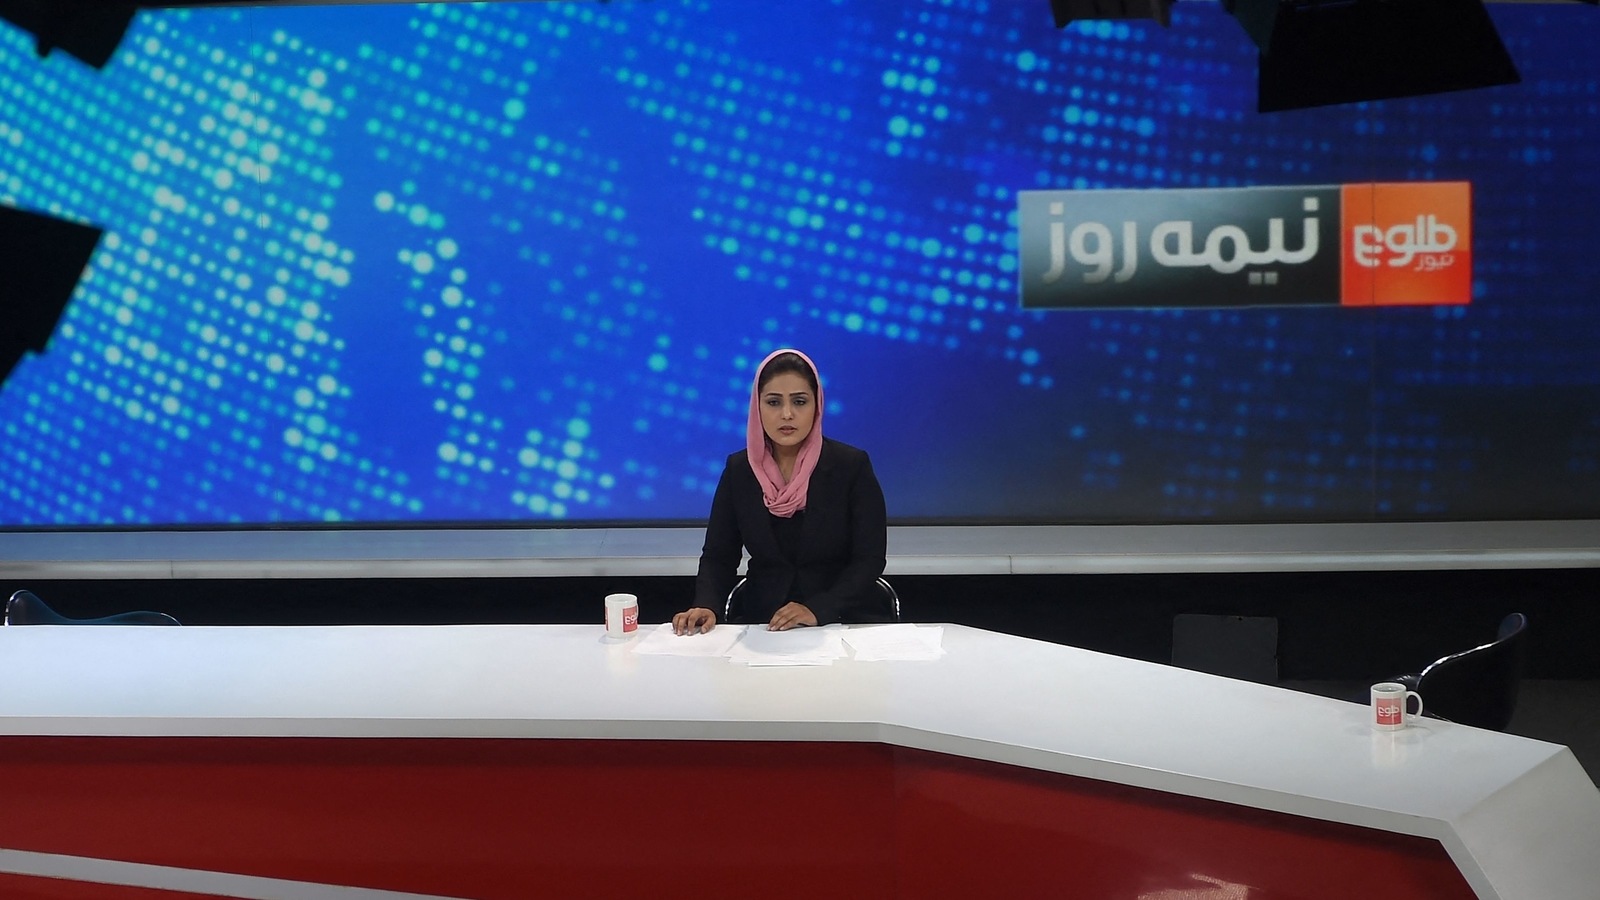 Taliban government new rules for TV anchors in Afghanistan